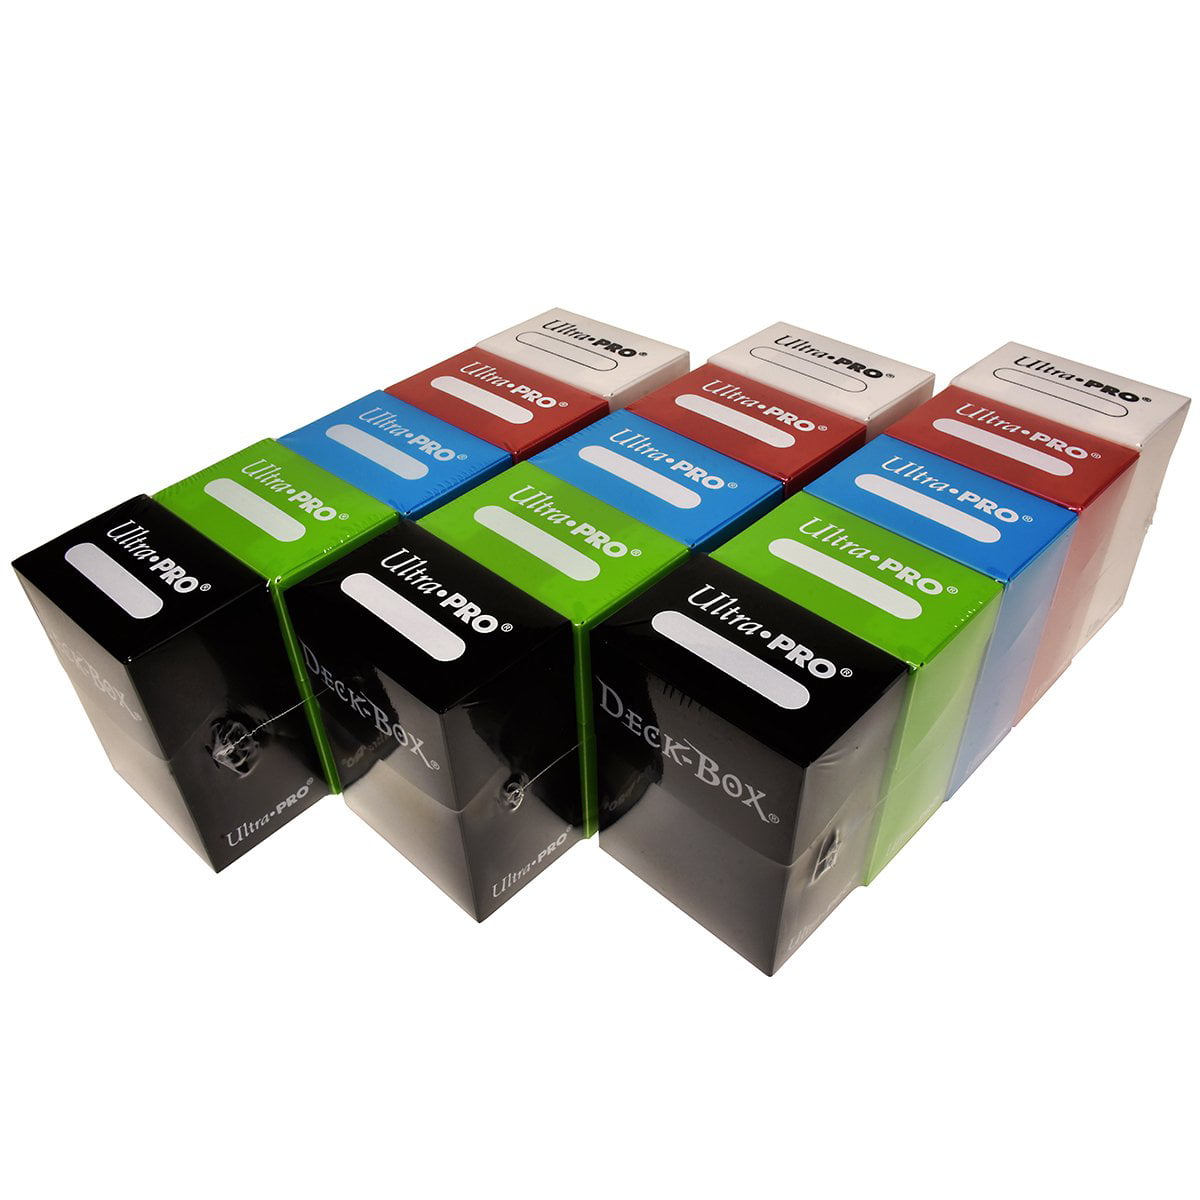 Set of Five New Ultra-Pro Deck Boxes For Magic/Pokemon/YuGiOh Cards Dark Colors Incl. Black, Blue, Brown, Green, and Red